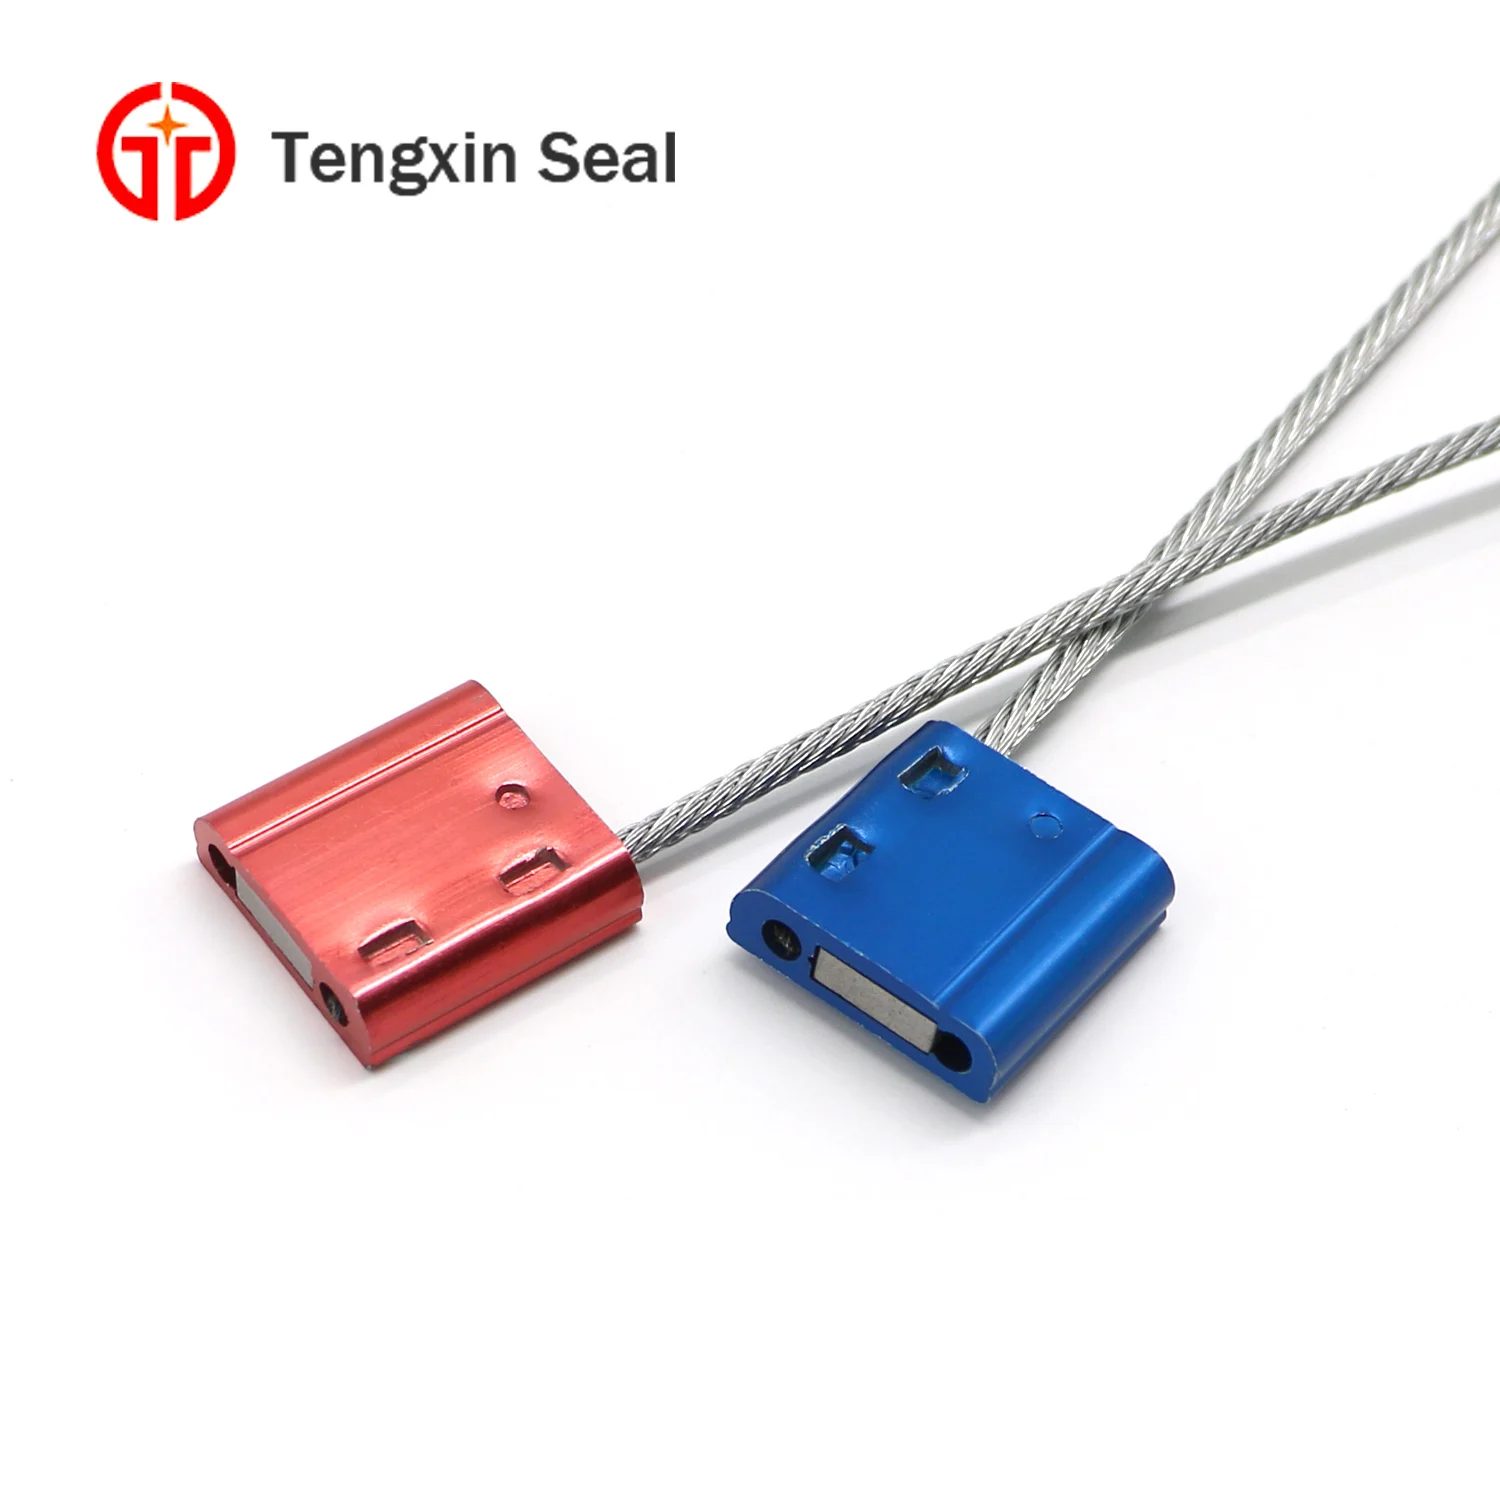 

TXCS 108 Metal Container Seal Truck Lock Wire Cable Security Seal, Red, bule, yellow, orange or customized